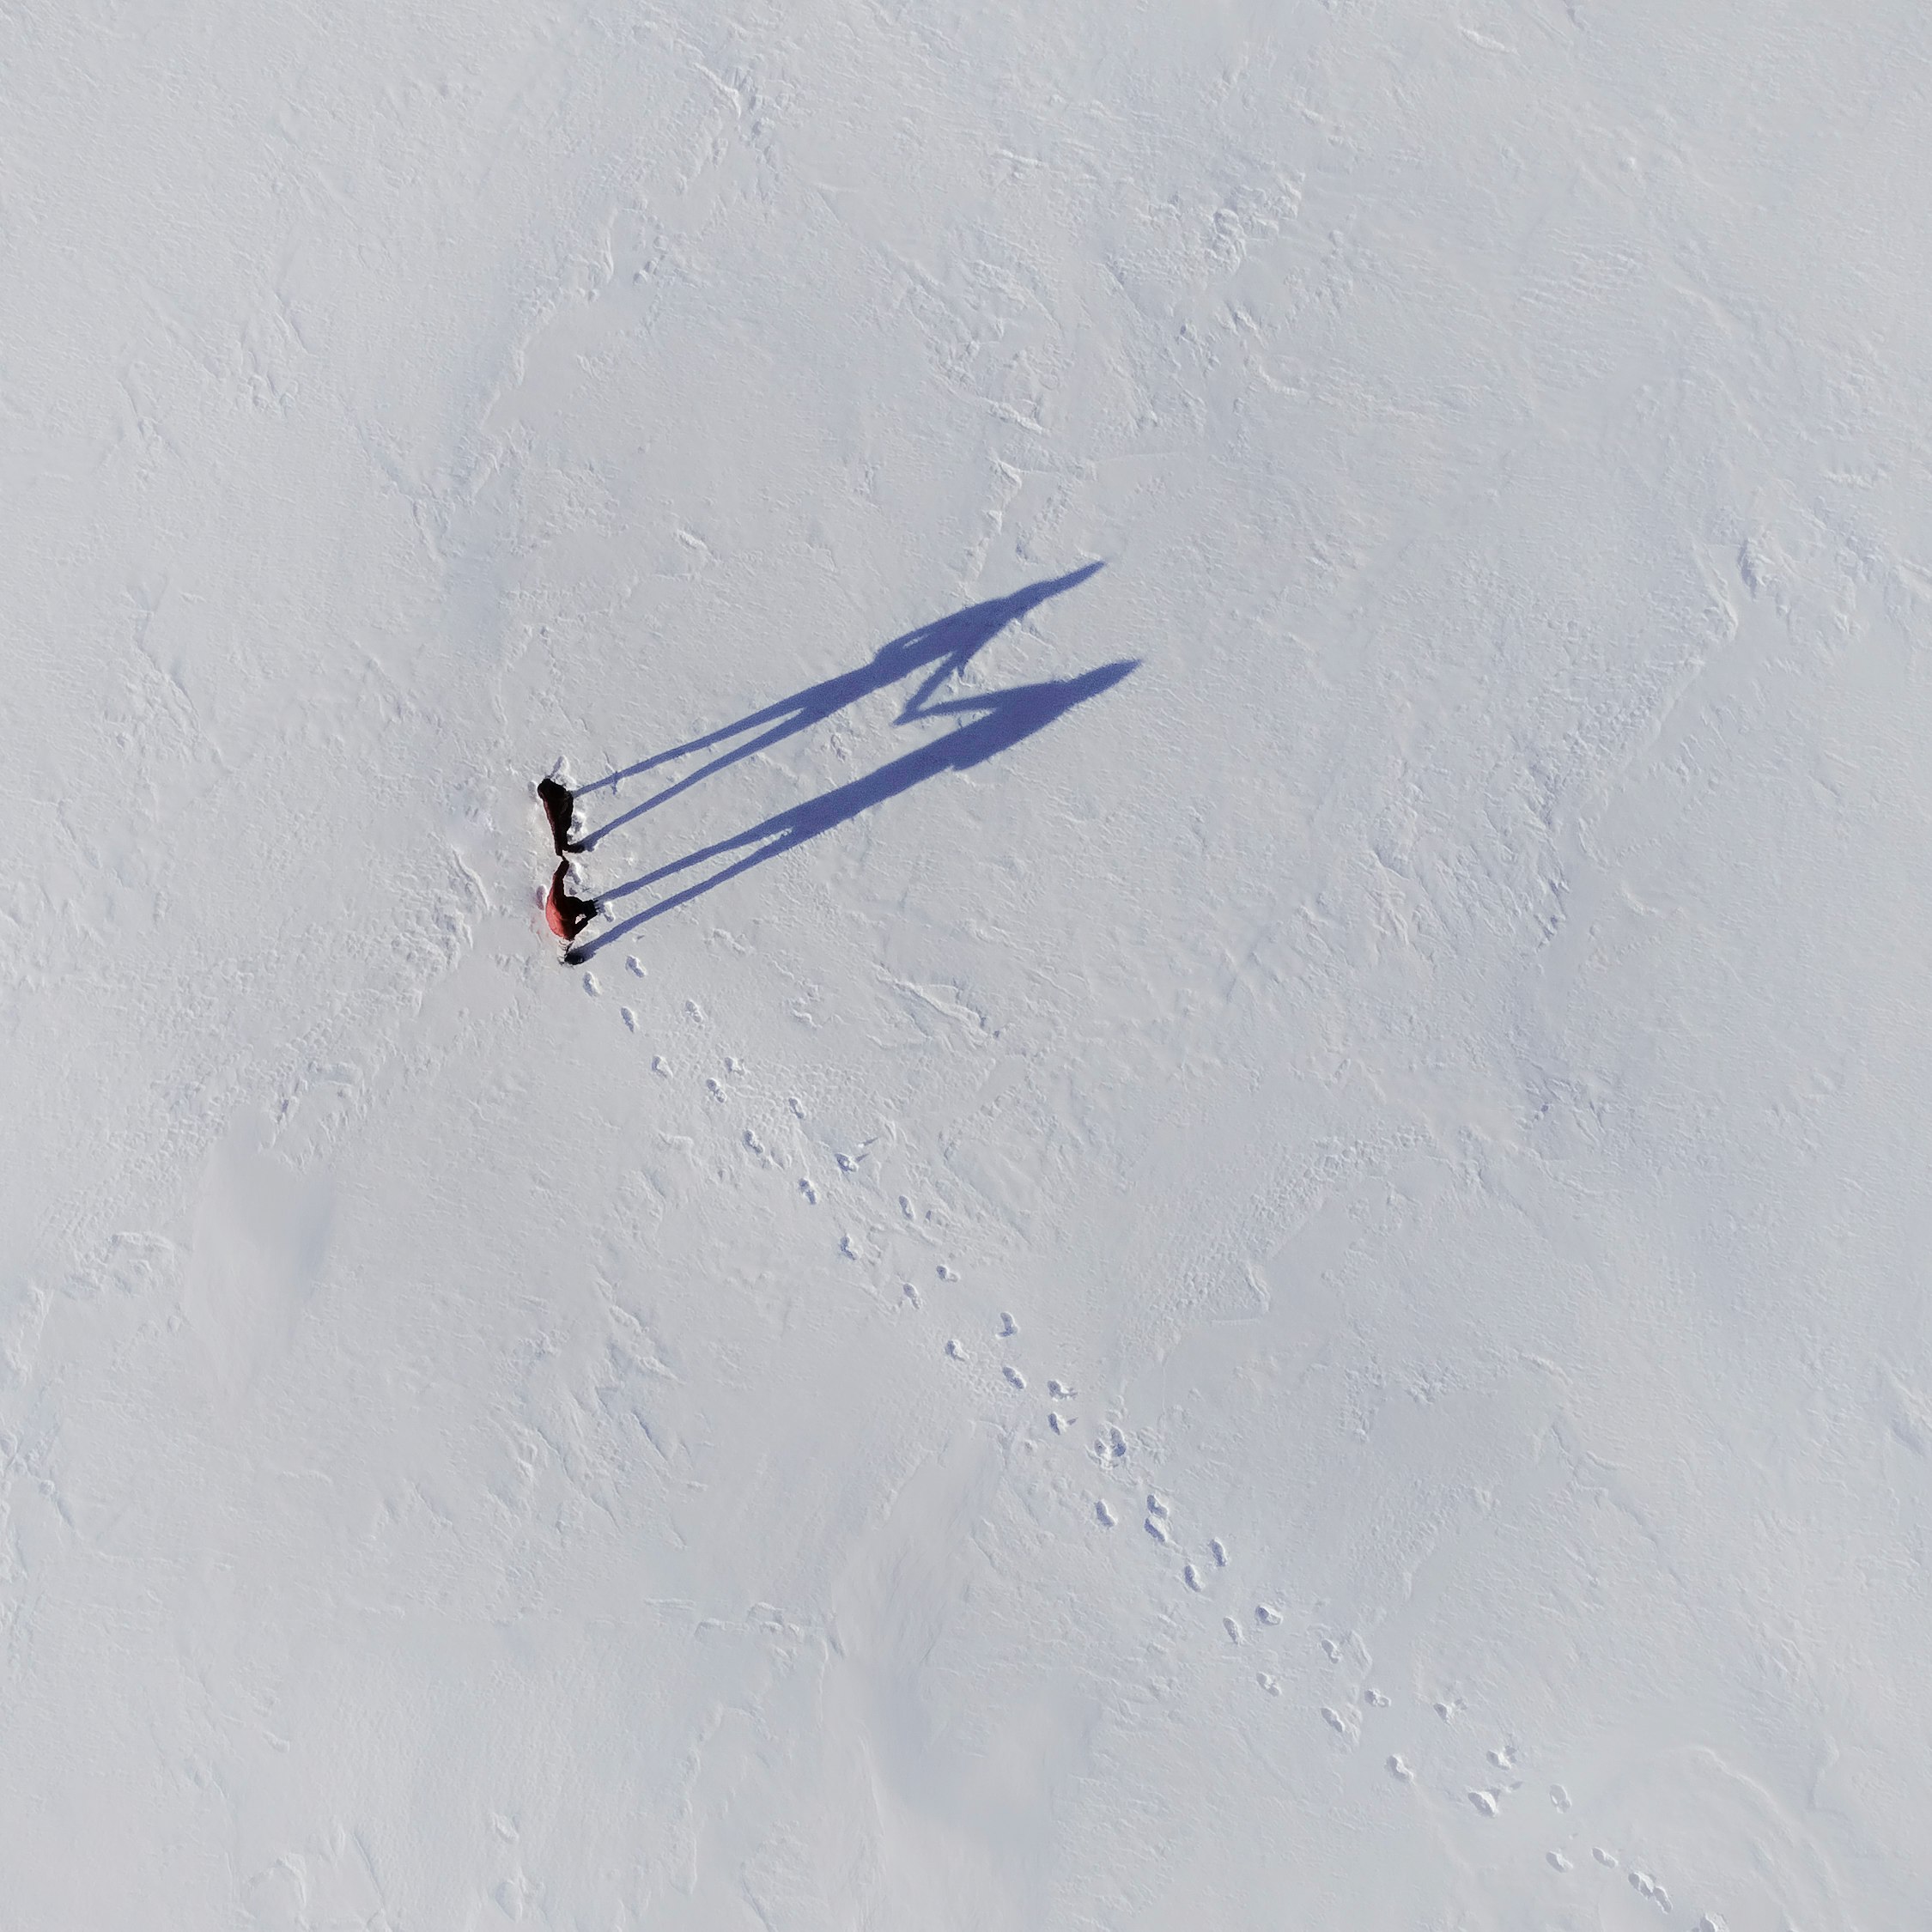 person walking on snow covered field during daytime